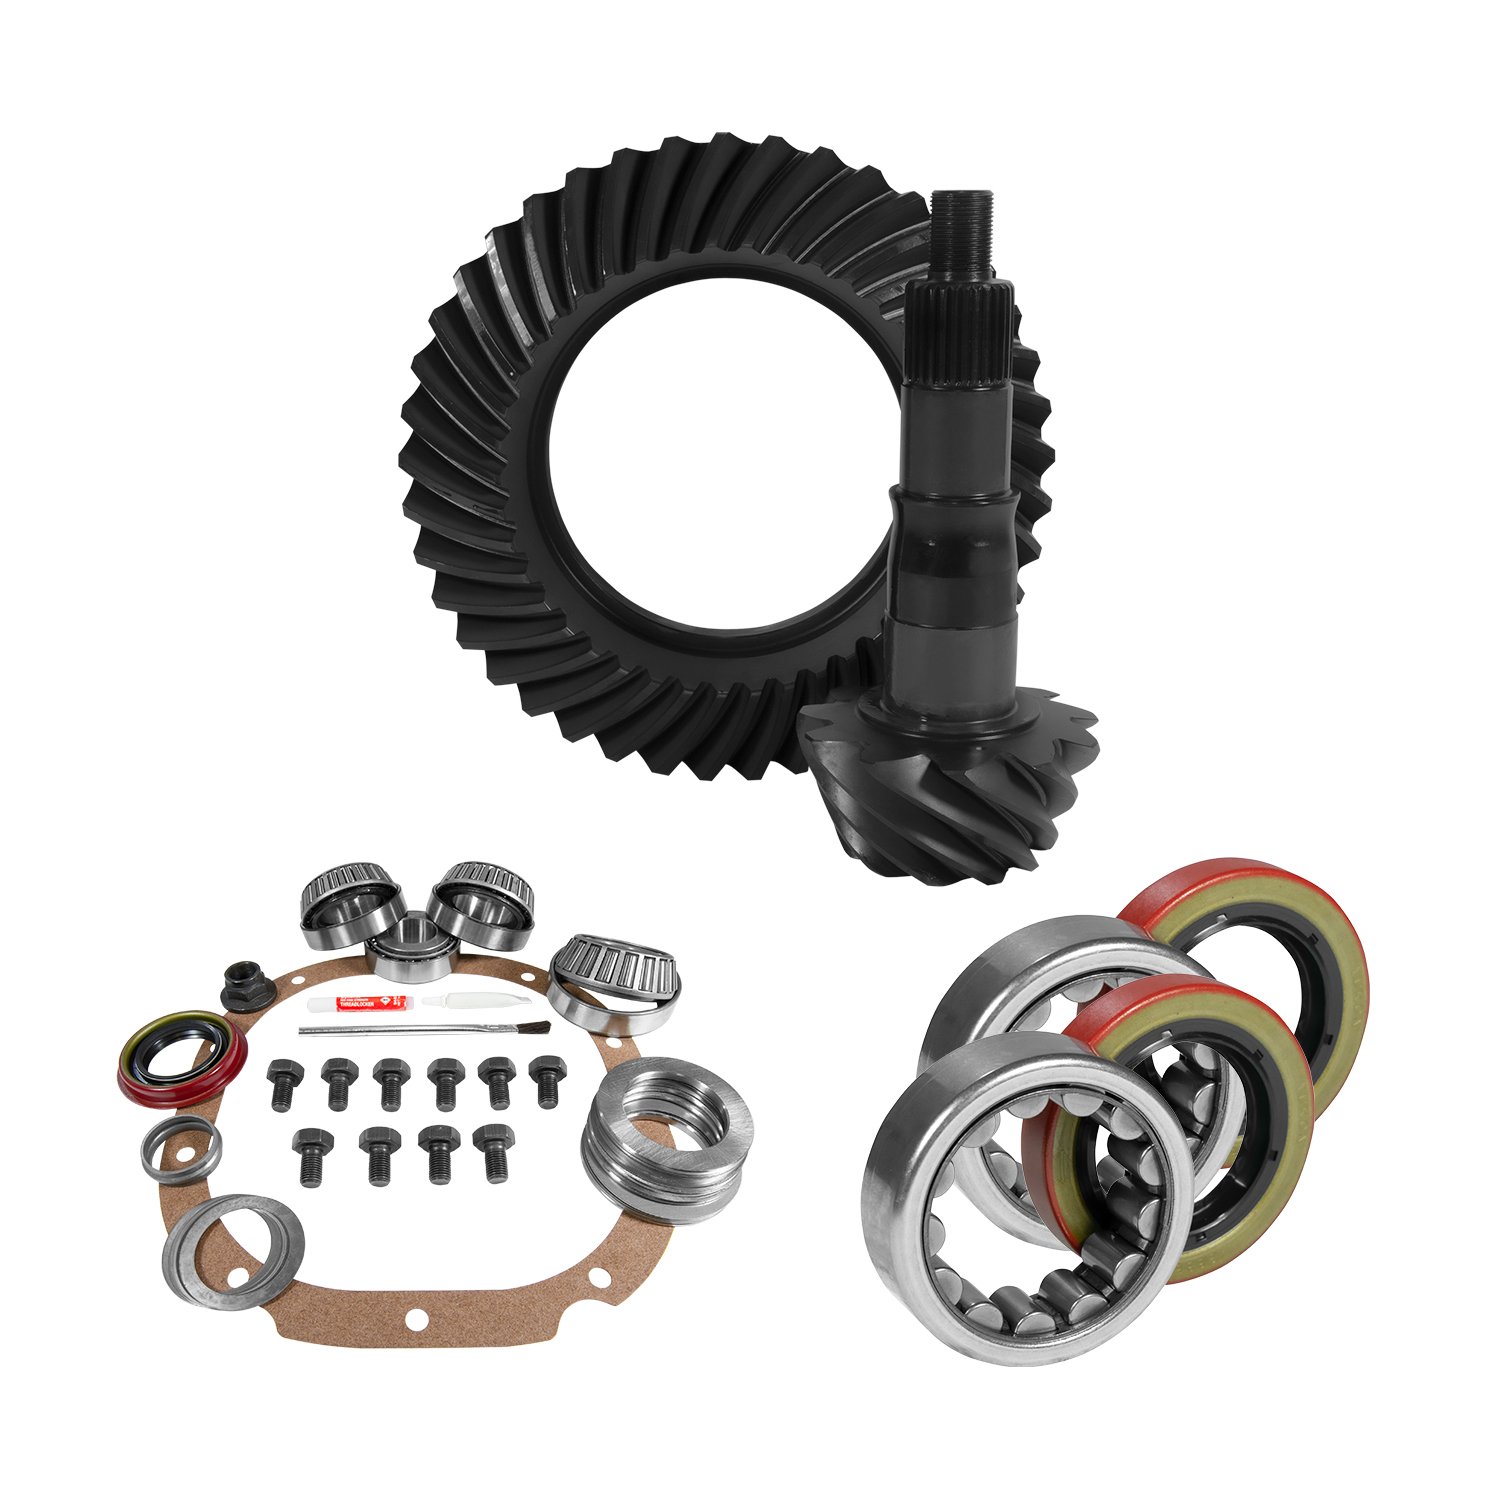 USA Standard 10754 8.8 in. Ford 3.27 Rear Ring & Pinion Install Kit, 2.53 in. Od Axle Bearings & Seals